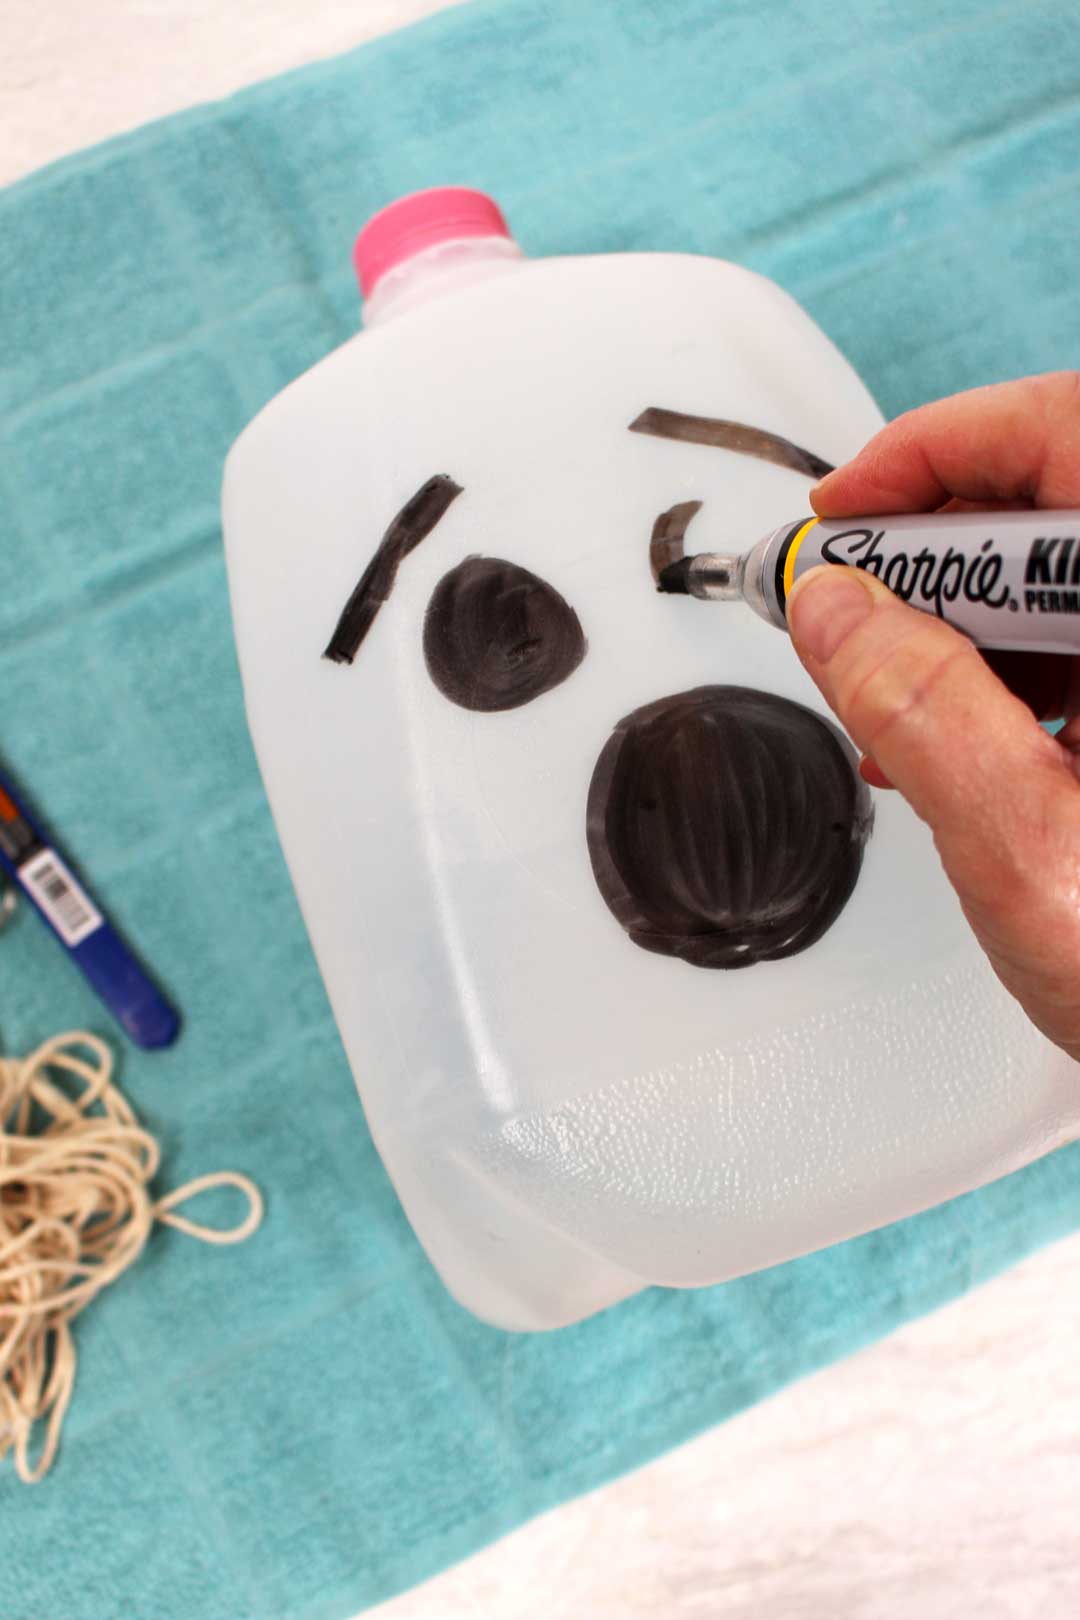 A sharpie drawing a ghost face on a recycled milk jug.